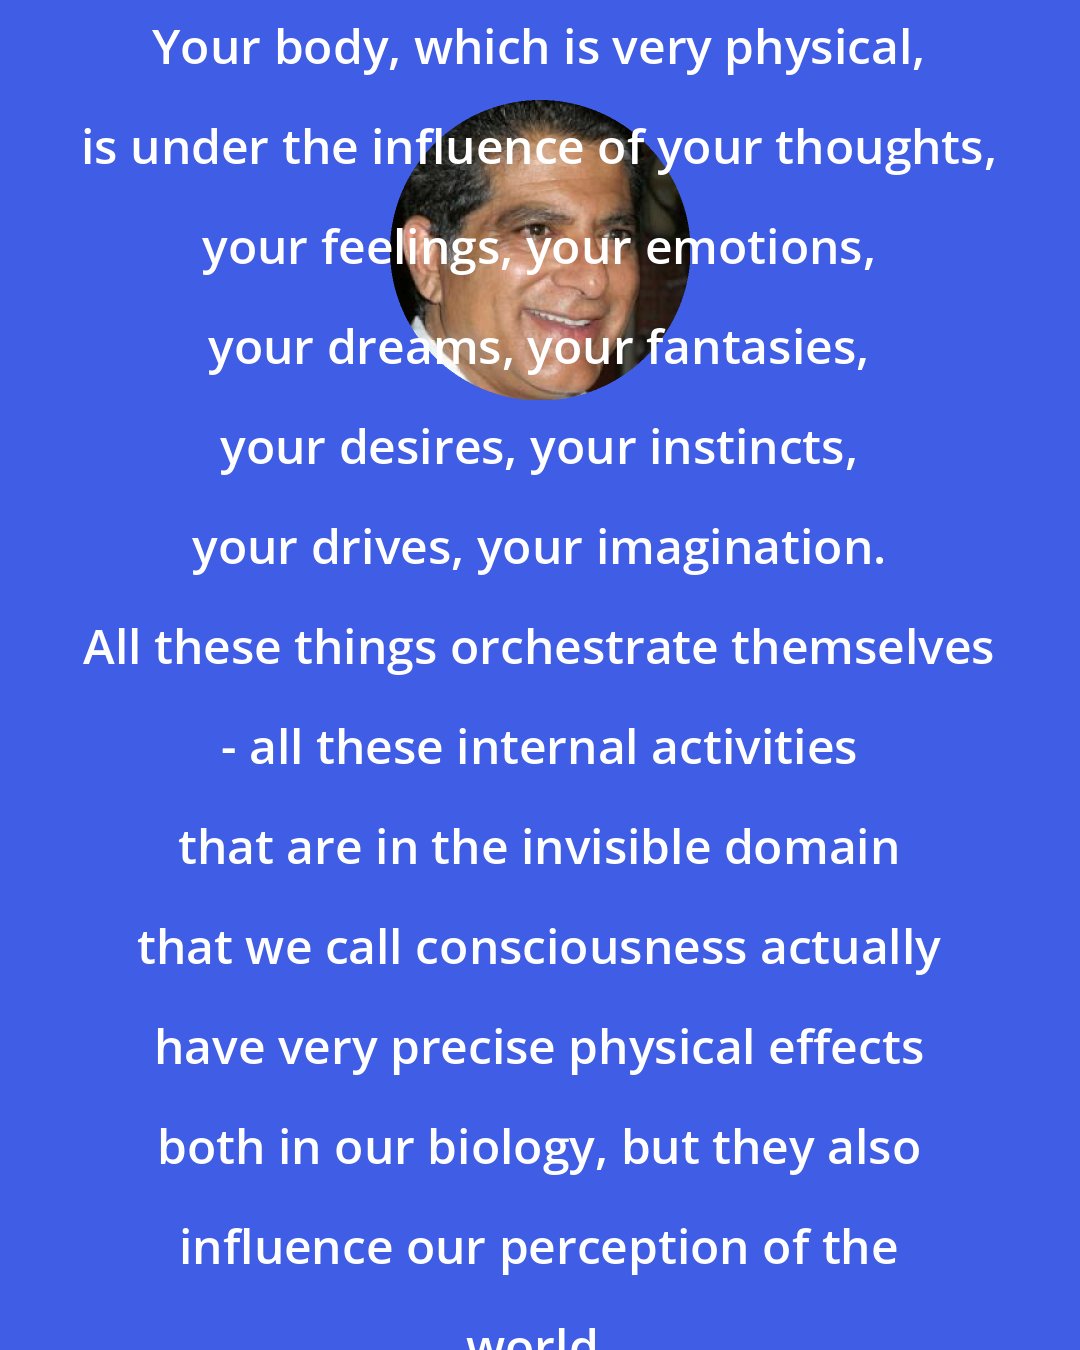 Deepak Chopra: Your body, which is very physical, is under the influence of your thoughts, your feelings, your emotions, your dreams, your fantasies, your desires, your instincts, your drives, your imagination. All these things orchestrate themselves - all these internal activities that are in the invisible domain that we call consciousness actually have very precise physical effects both in our biology, but they also influence our perception of the world.